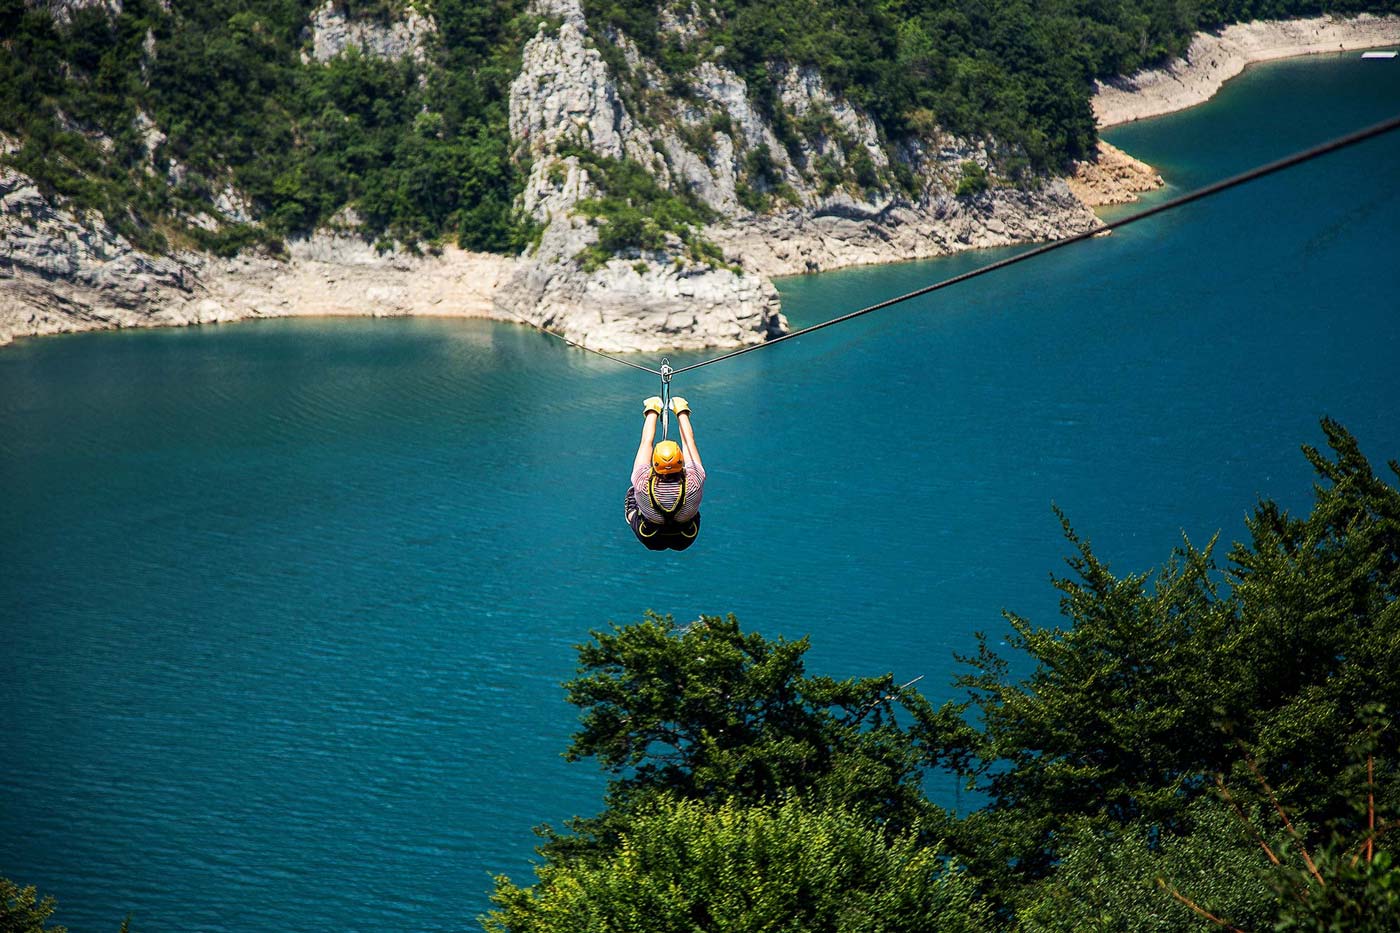 Photo showing a person ziplining in Omis